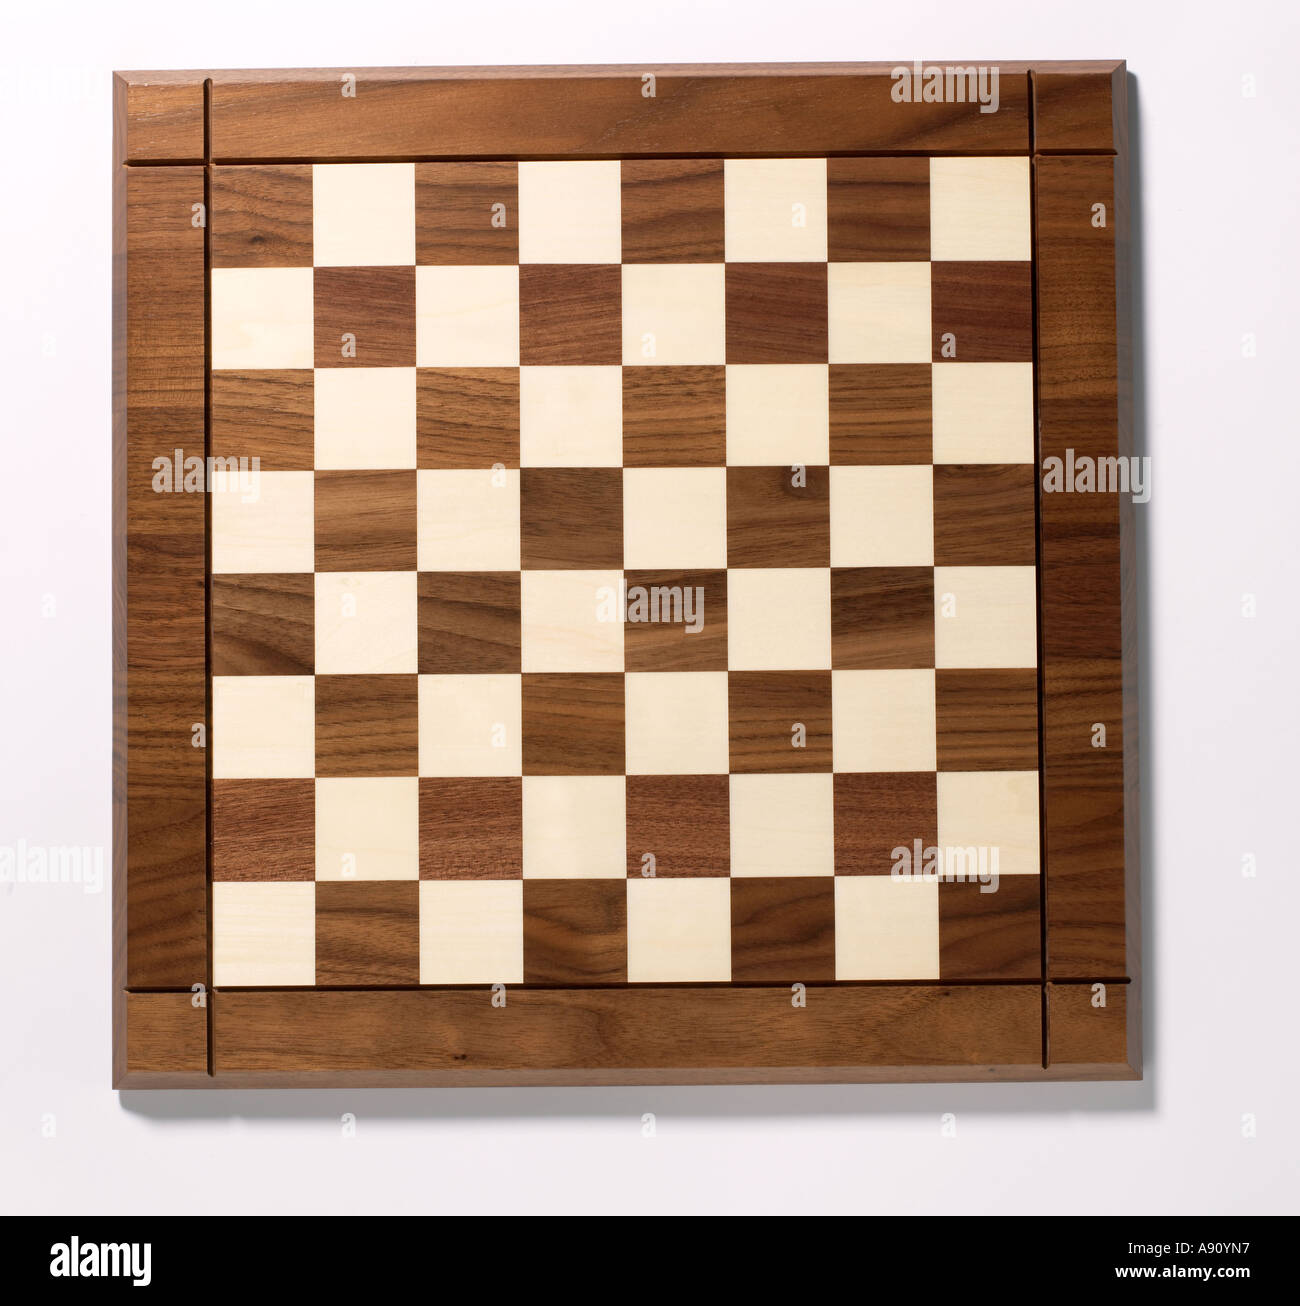 Chess Checkers Board elevated view Stock Photo